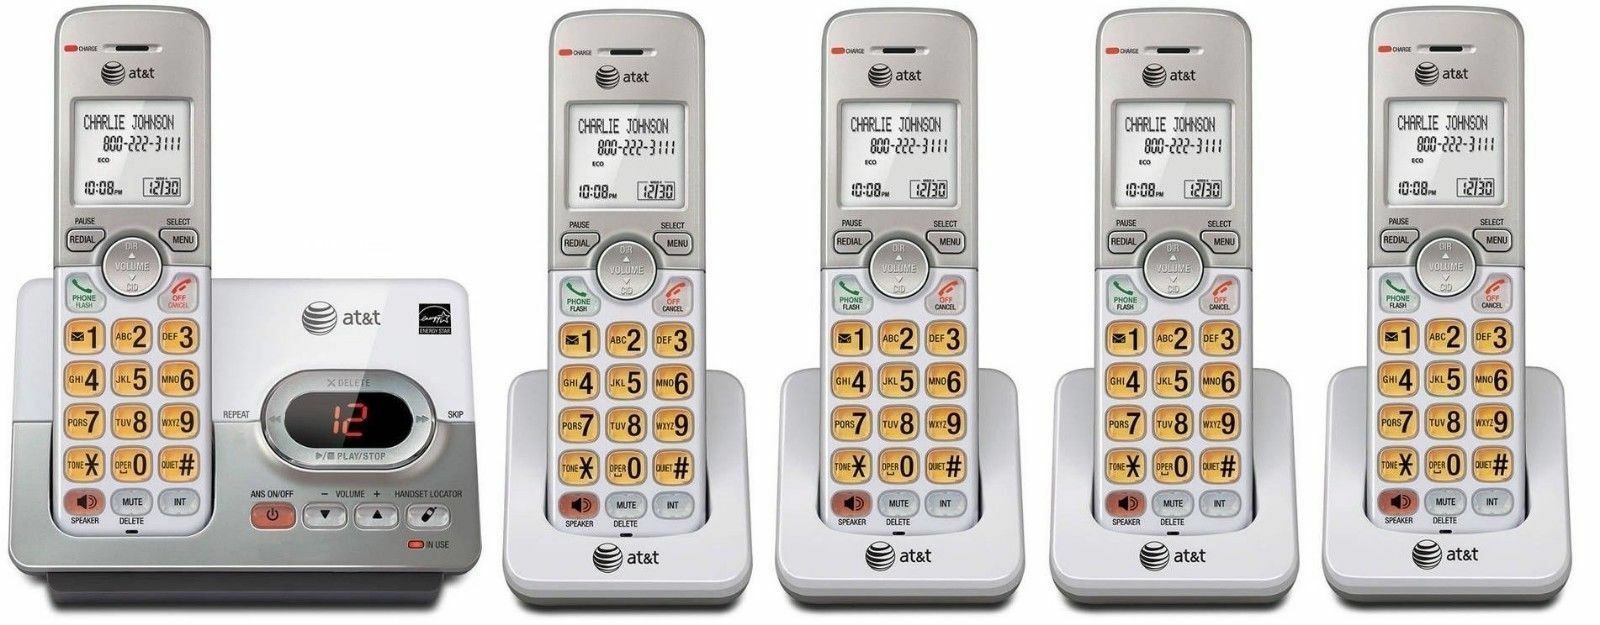 At&t El52253 Dect 6.0 5-handset Cordless Answering System With Caller Id/call